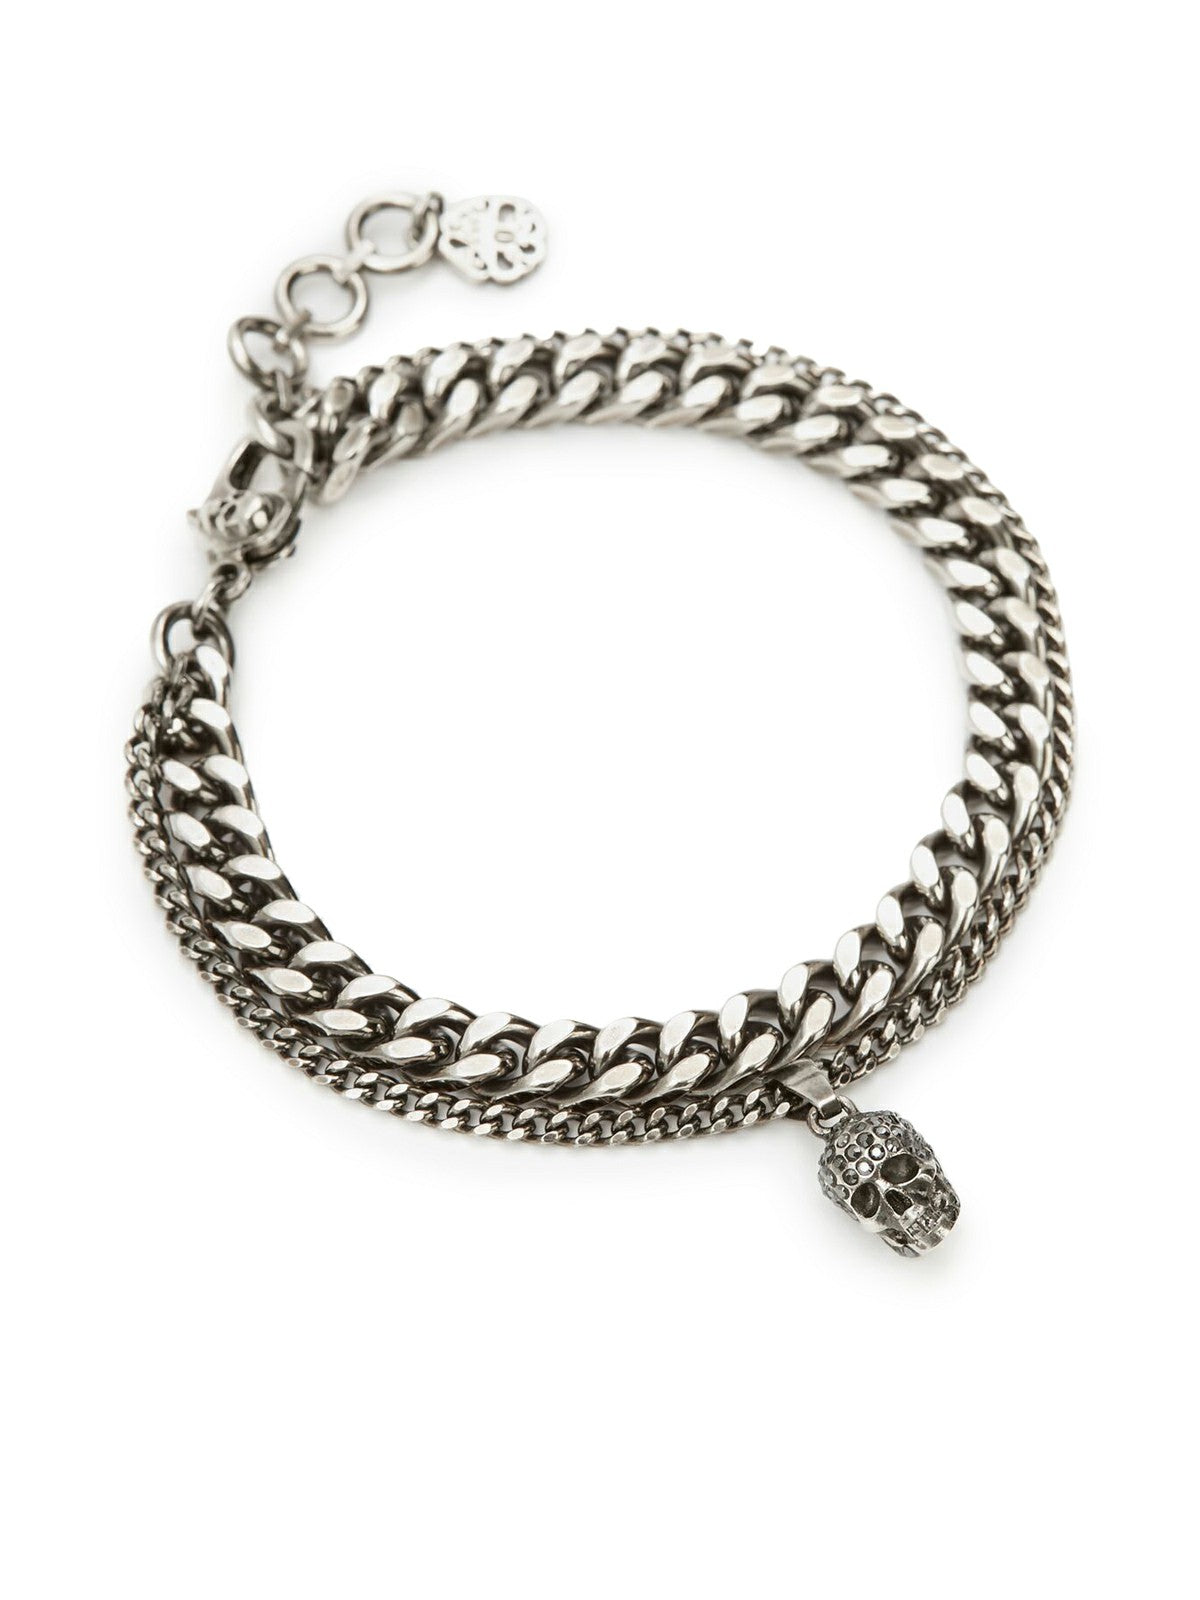 Bracelet With Techio Pavé Chain in Antique Silver